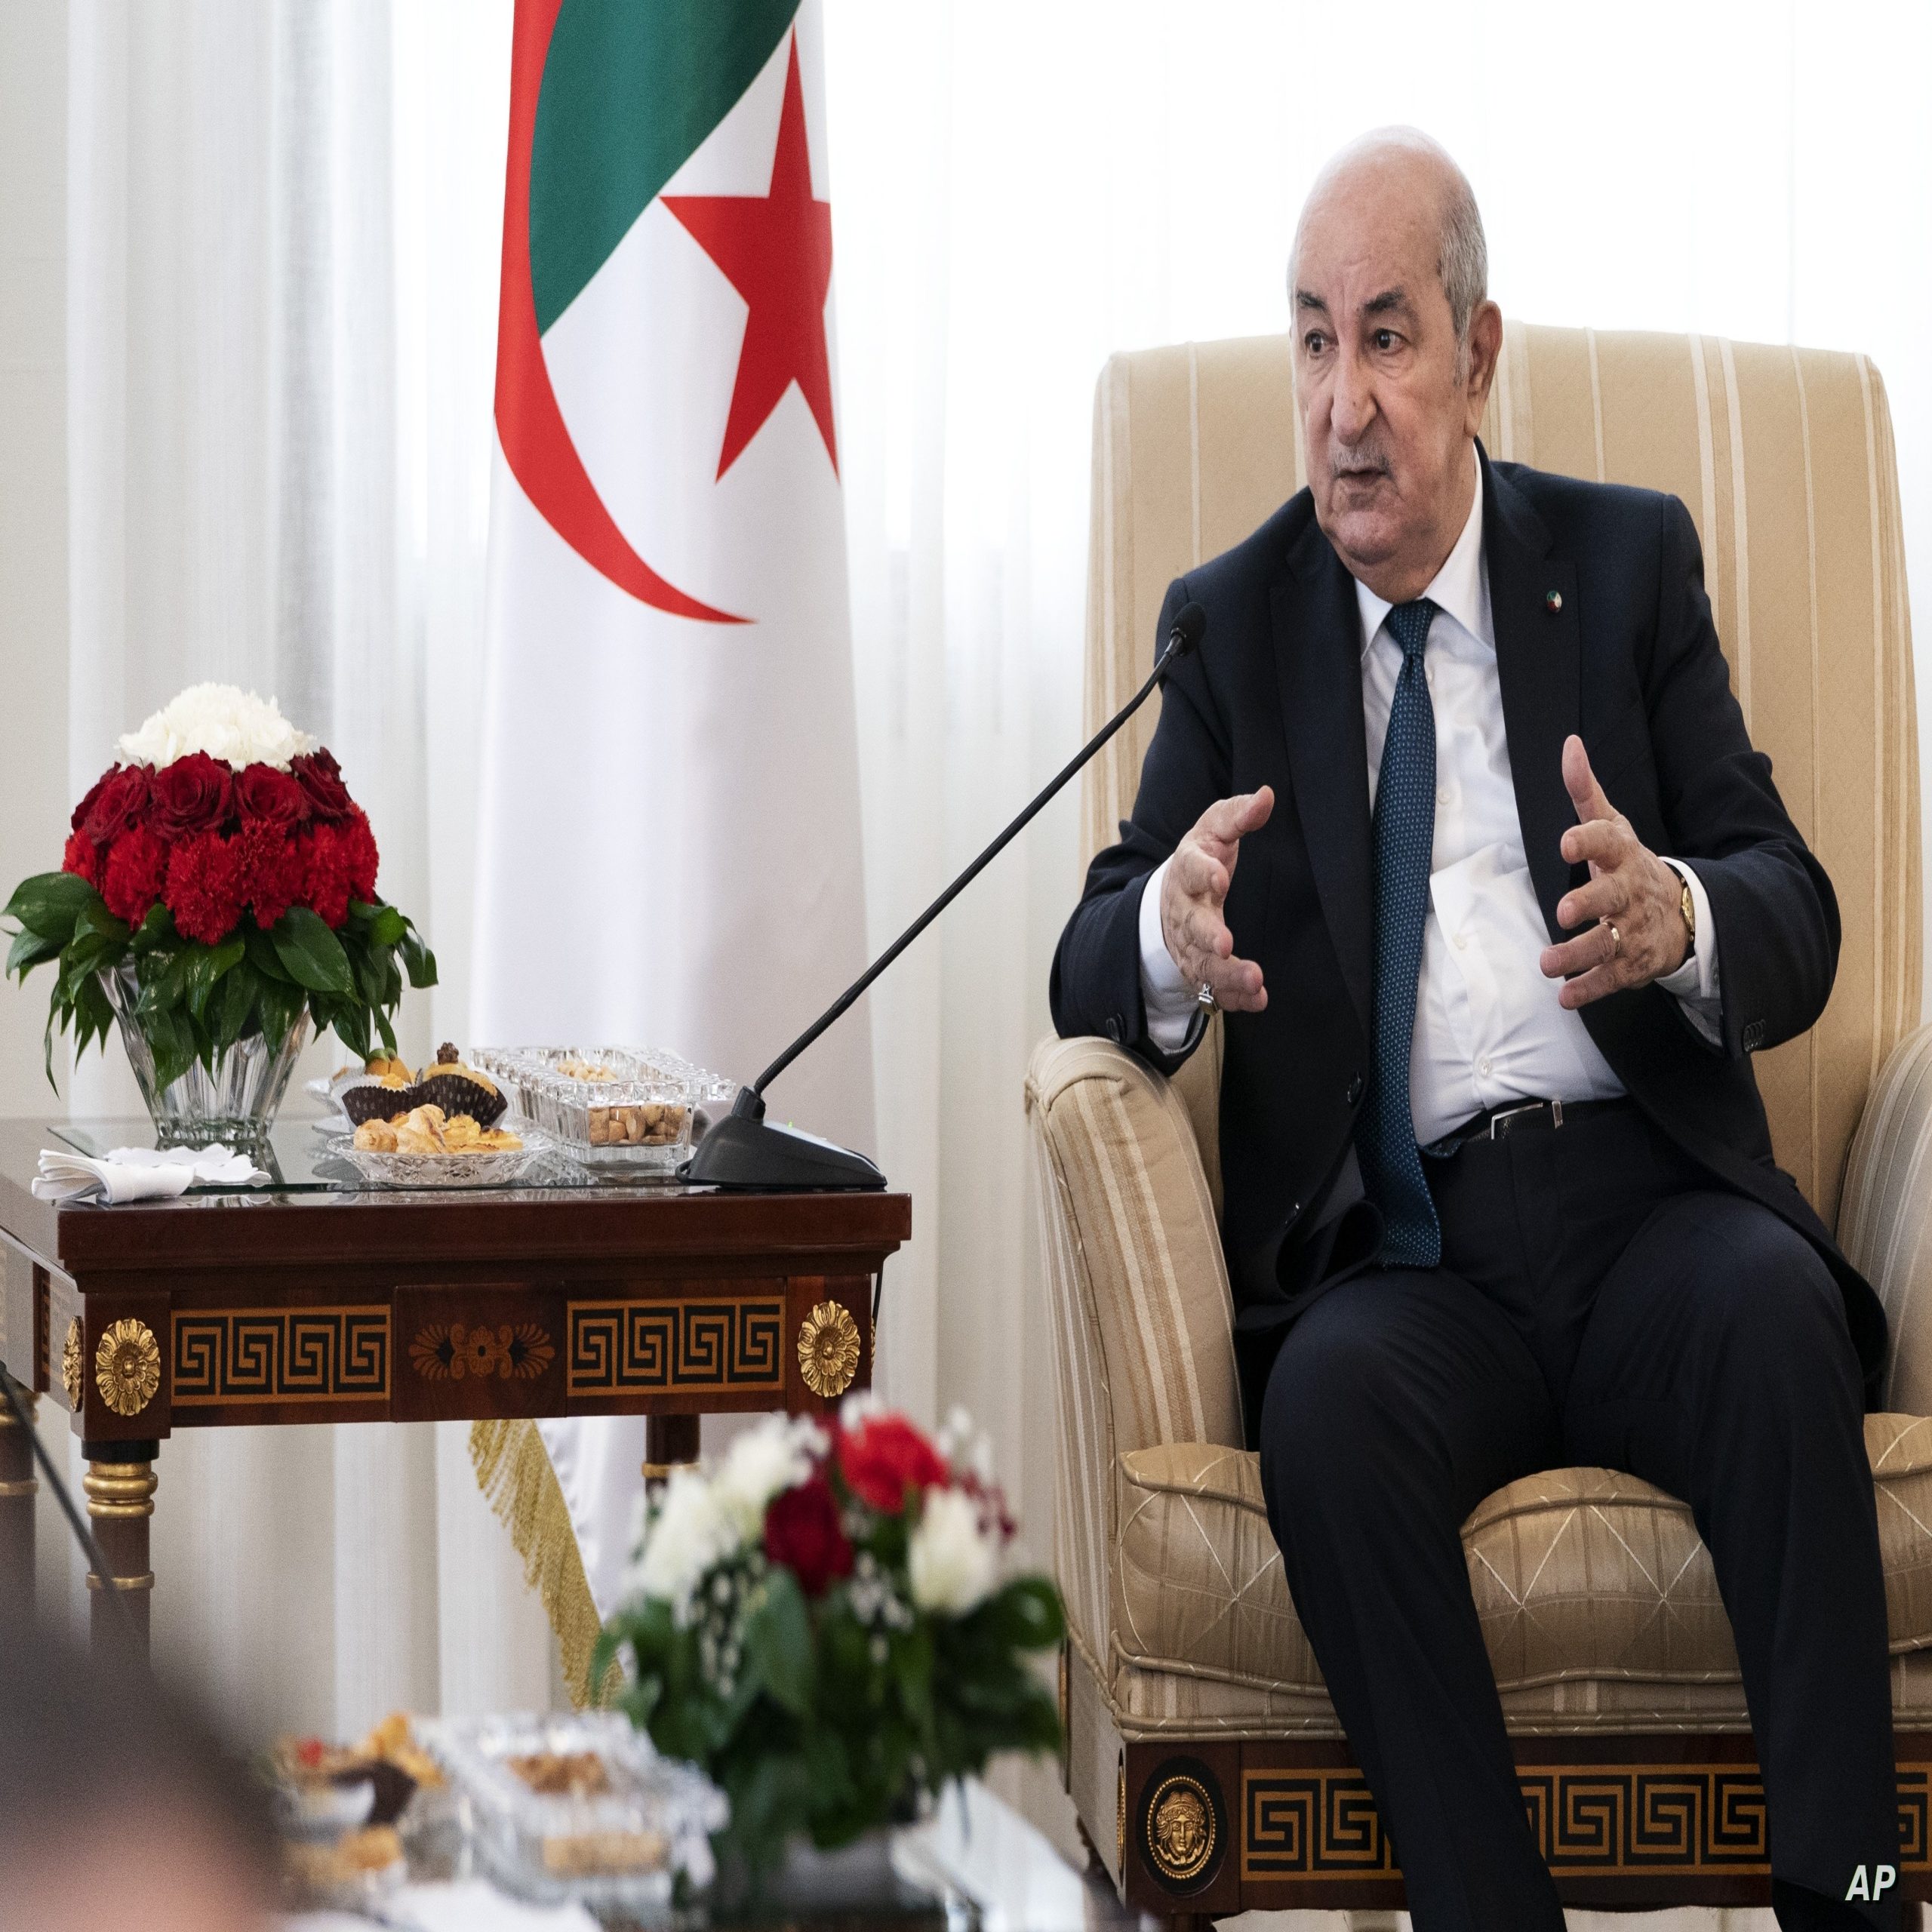 Algeria's President Abdelmadjid Tebboune, speaks for just under a half hour during the start of a meeting with U.S. Secretary of State Antony Blinken, Wednesday, March 30, 2022, at El Mouradia Palace, the President's official residence in Algiers, Algeria. (AP Photo/Jacquelyn Martin, Pool)